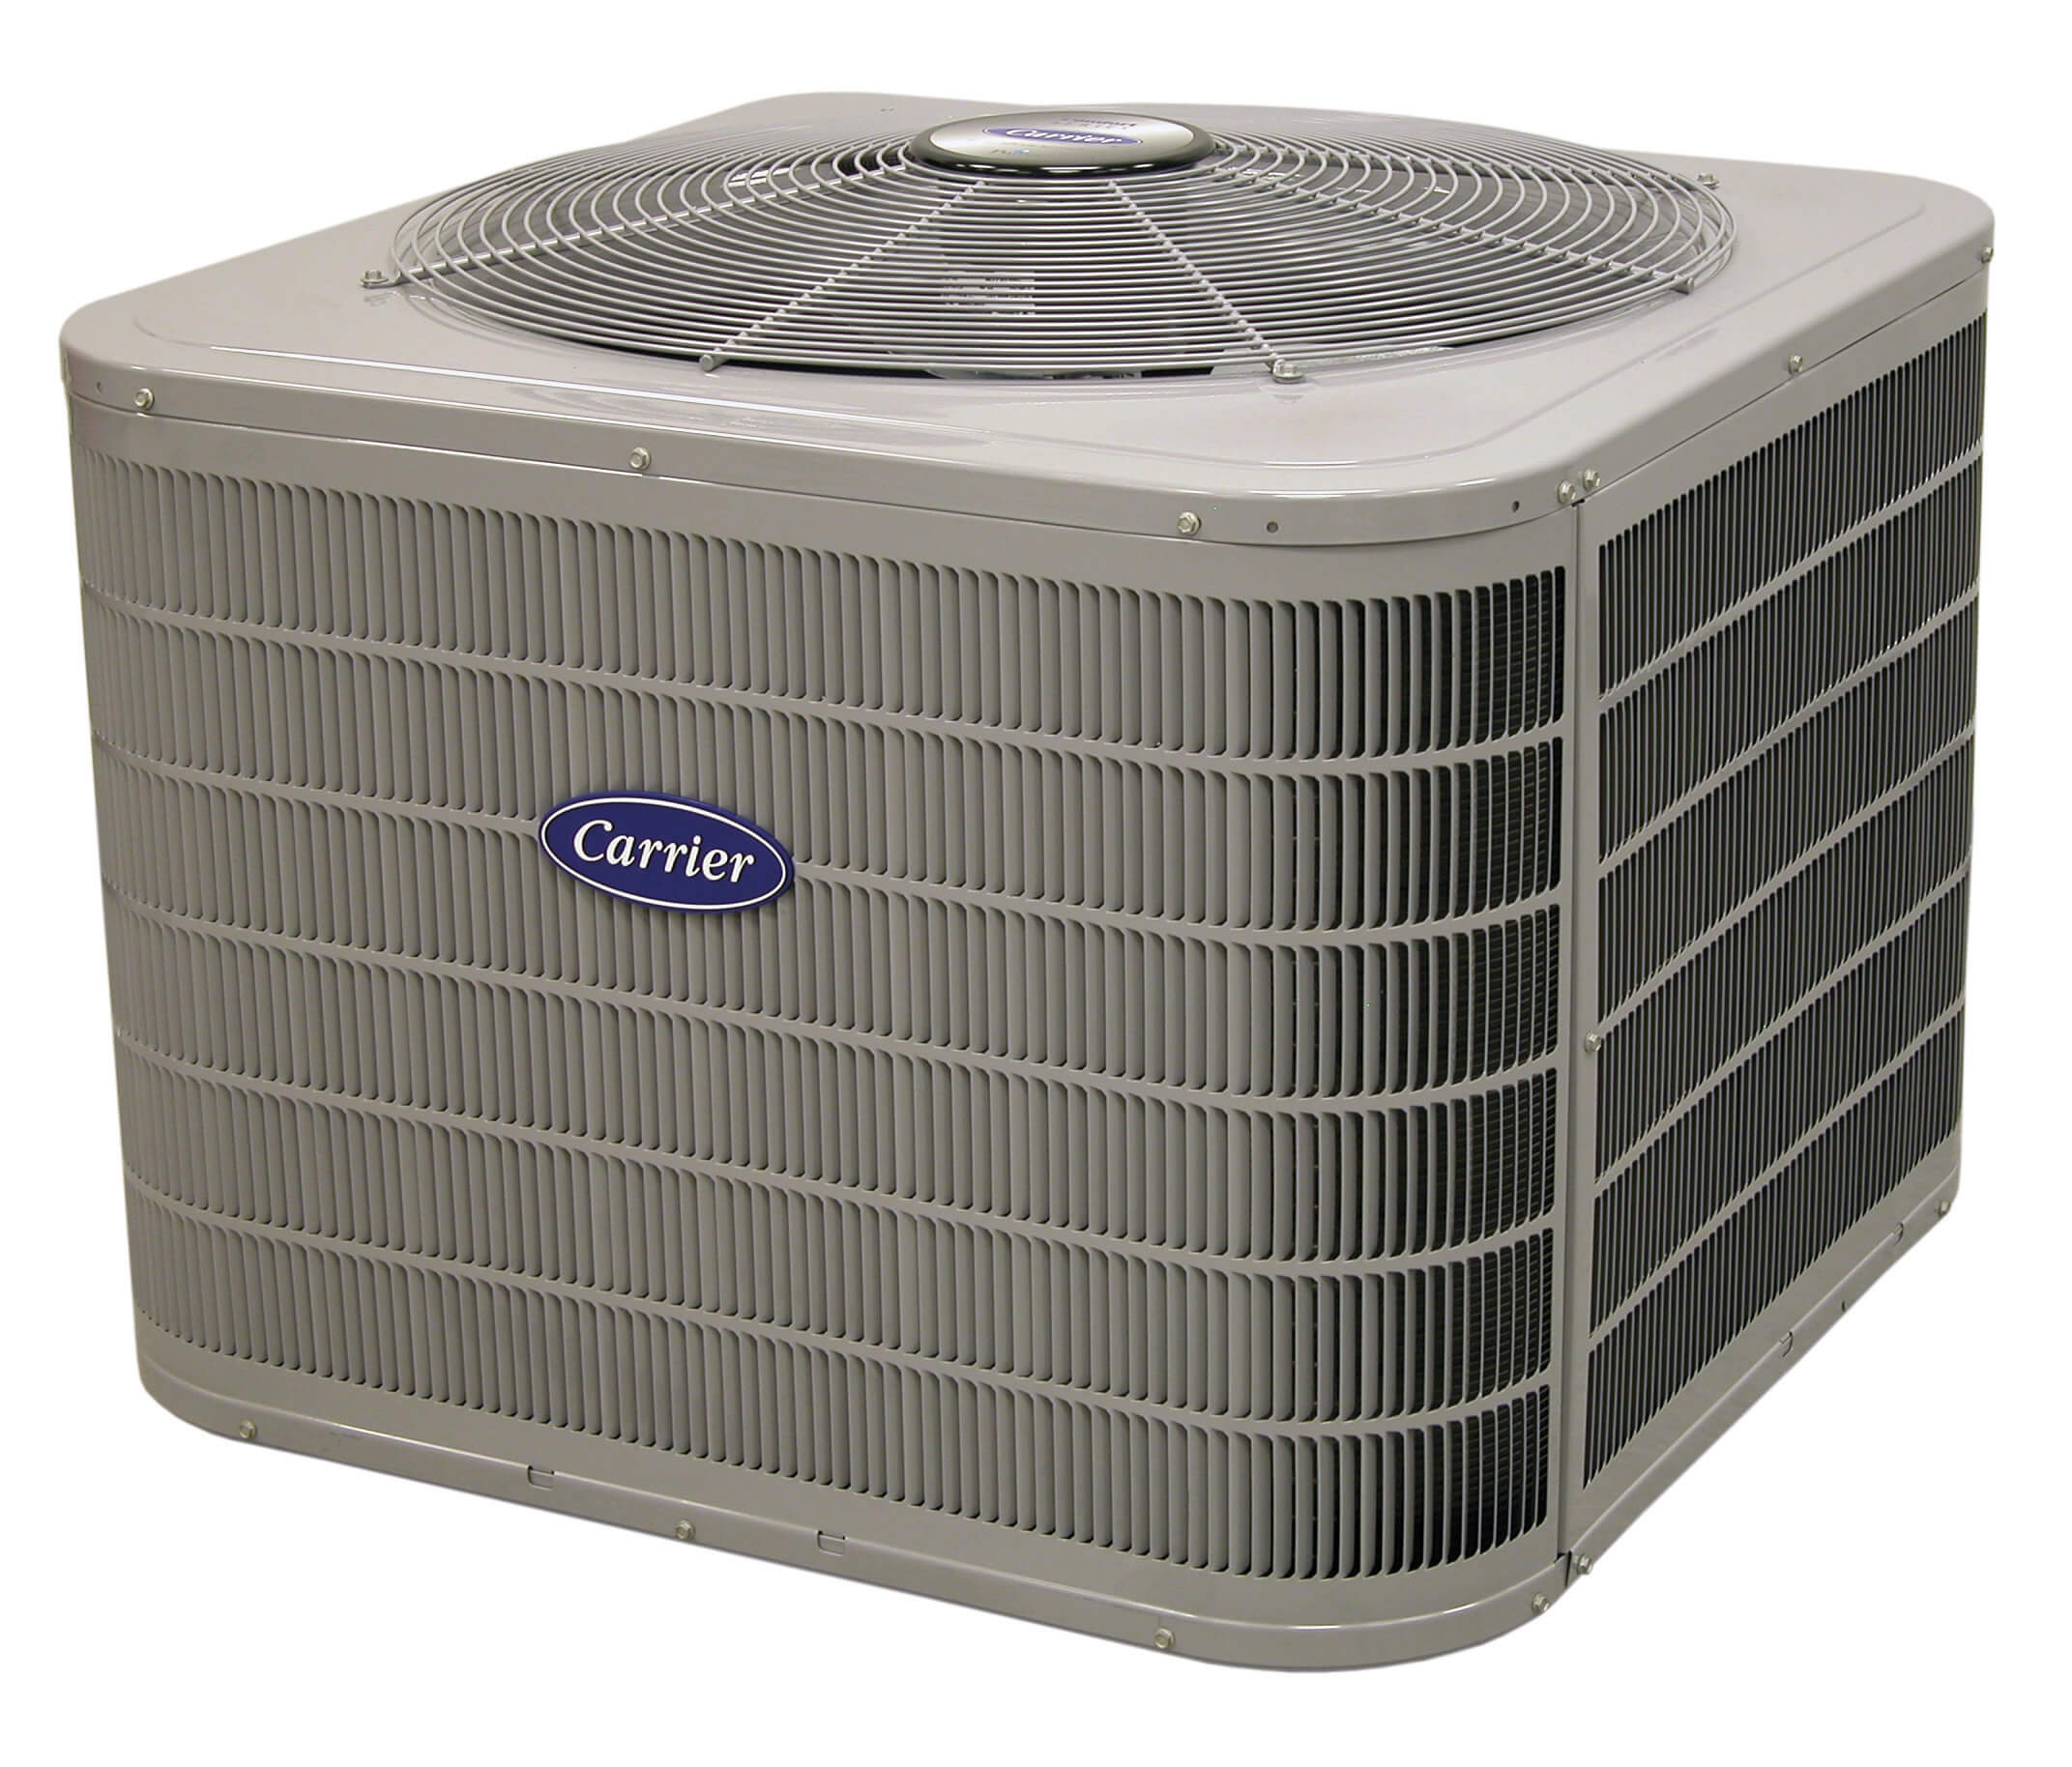 Carrier central air conditioning system